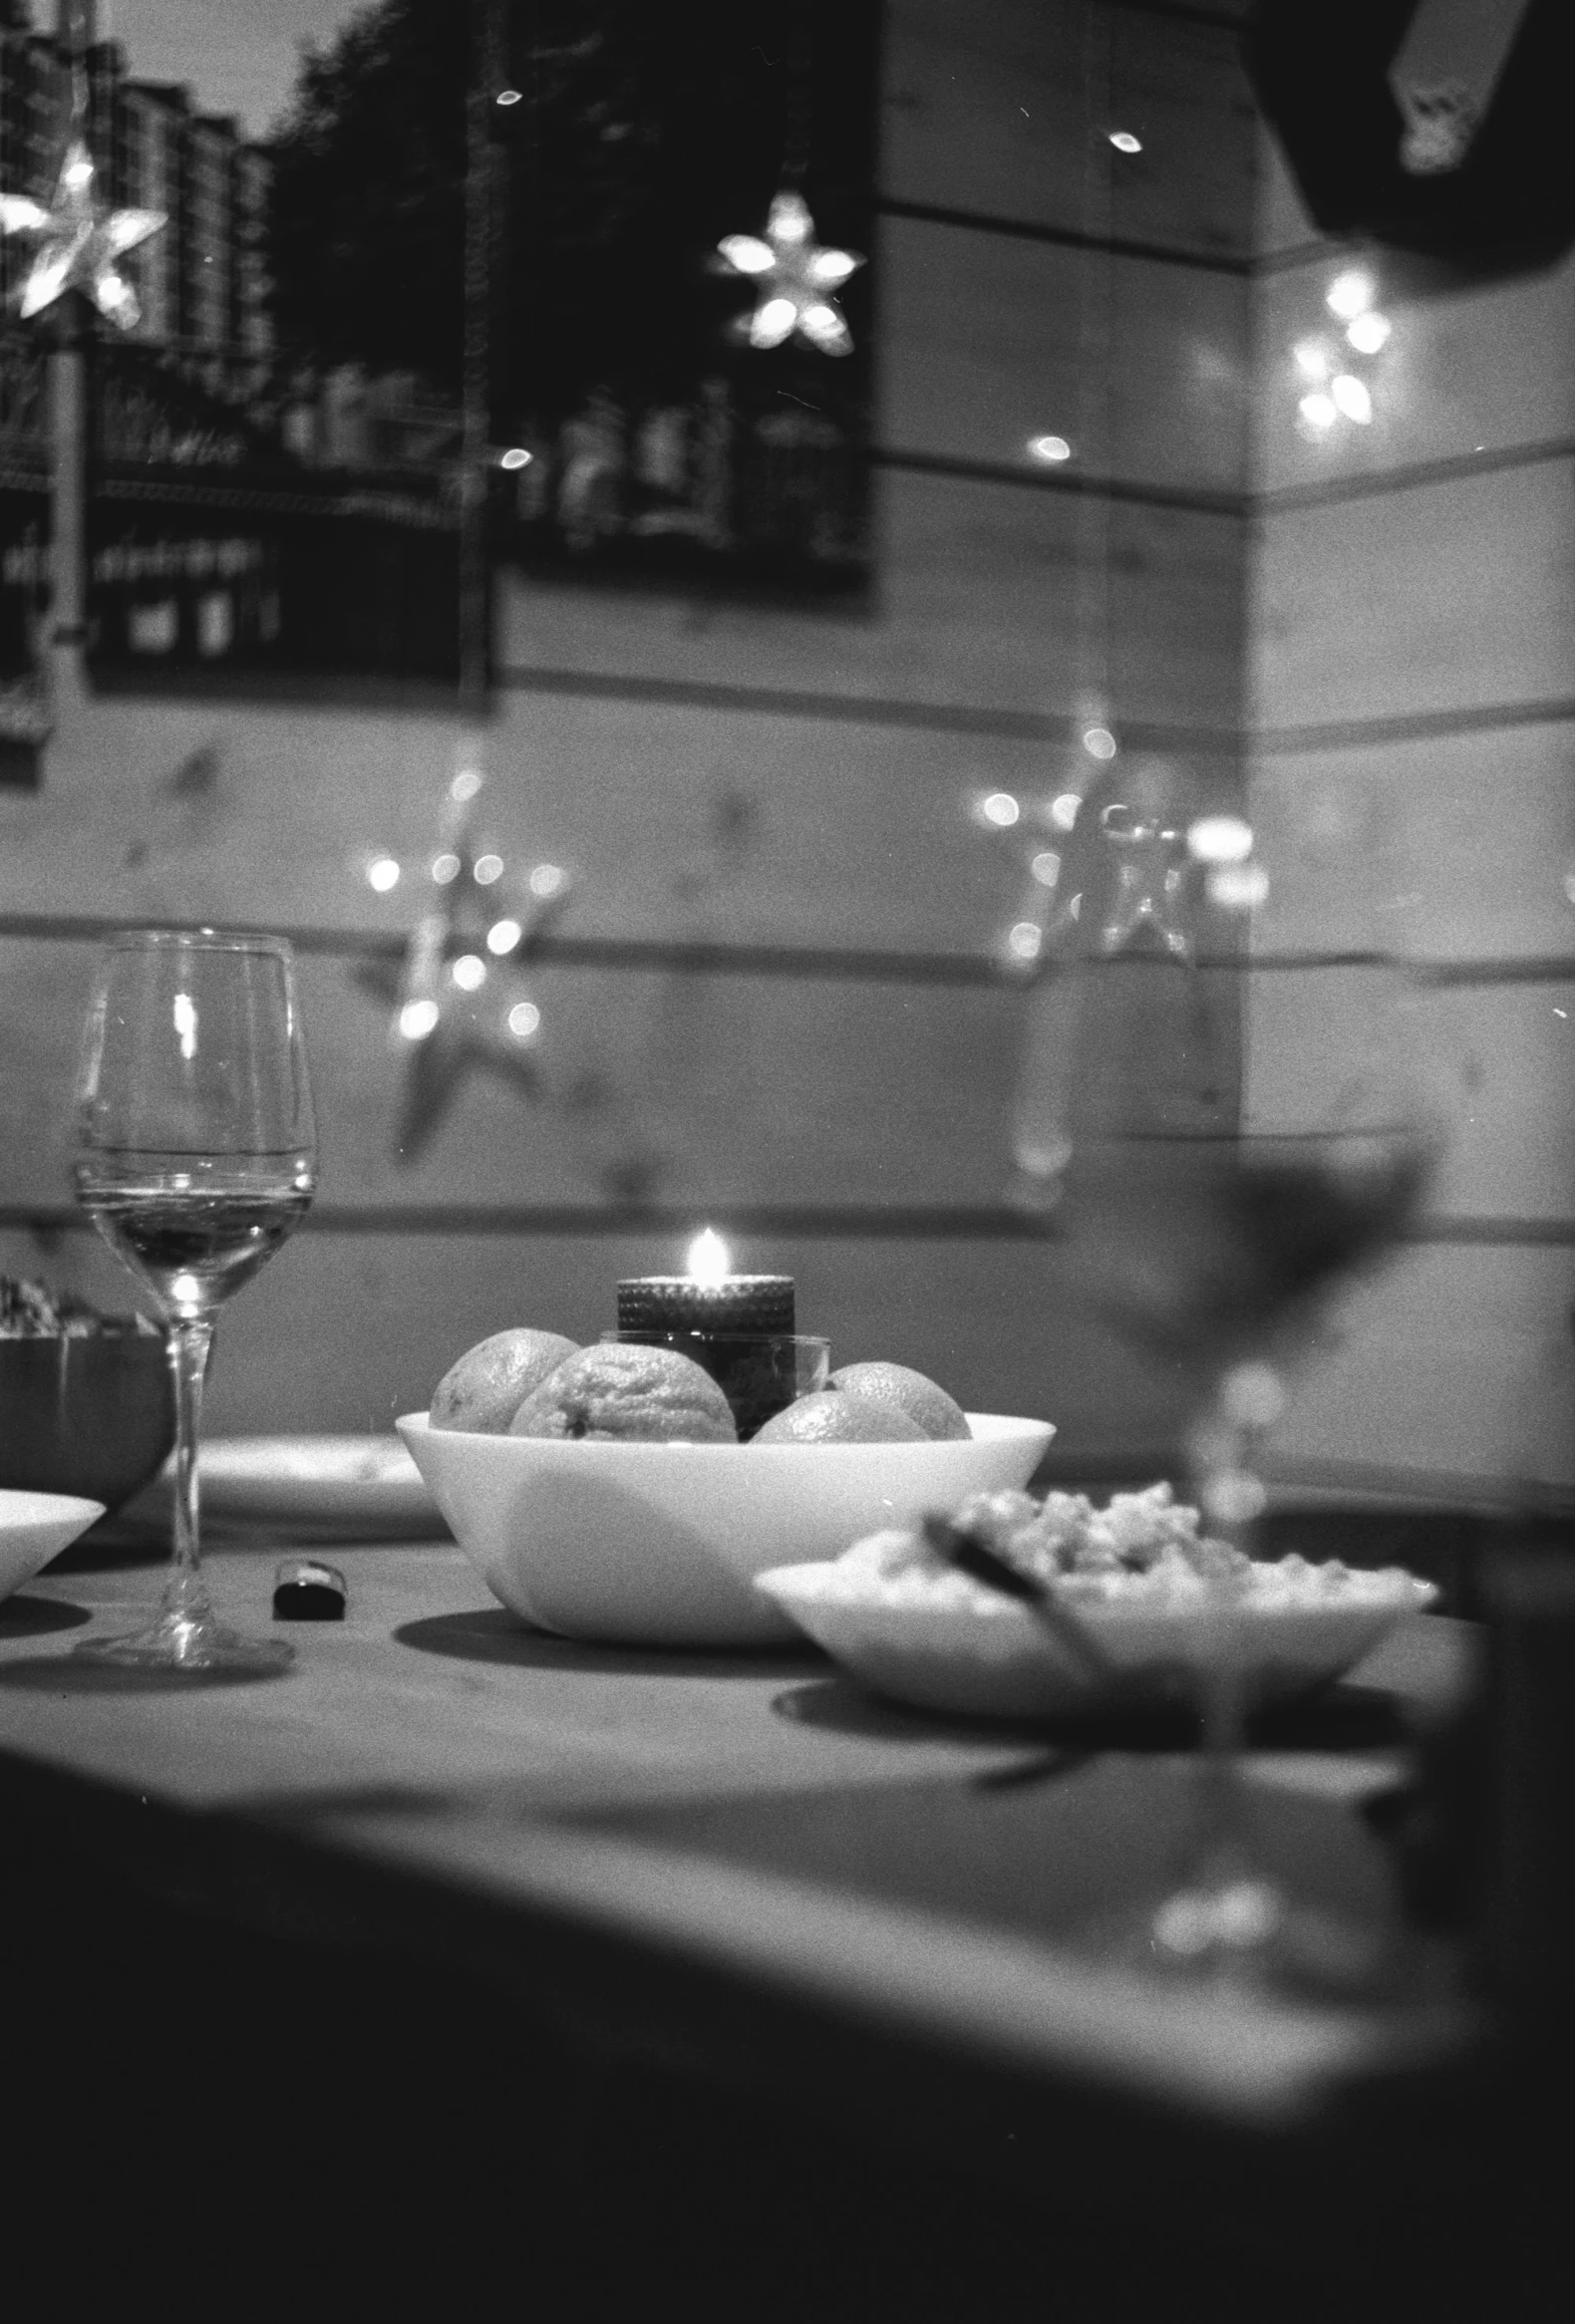 a table topped with plates of food and glasses of wine, a black and white photo, flickr, \!cinestill 50d! film photo, christmas night, pleasant cozy atmosphere, chilling